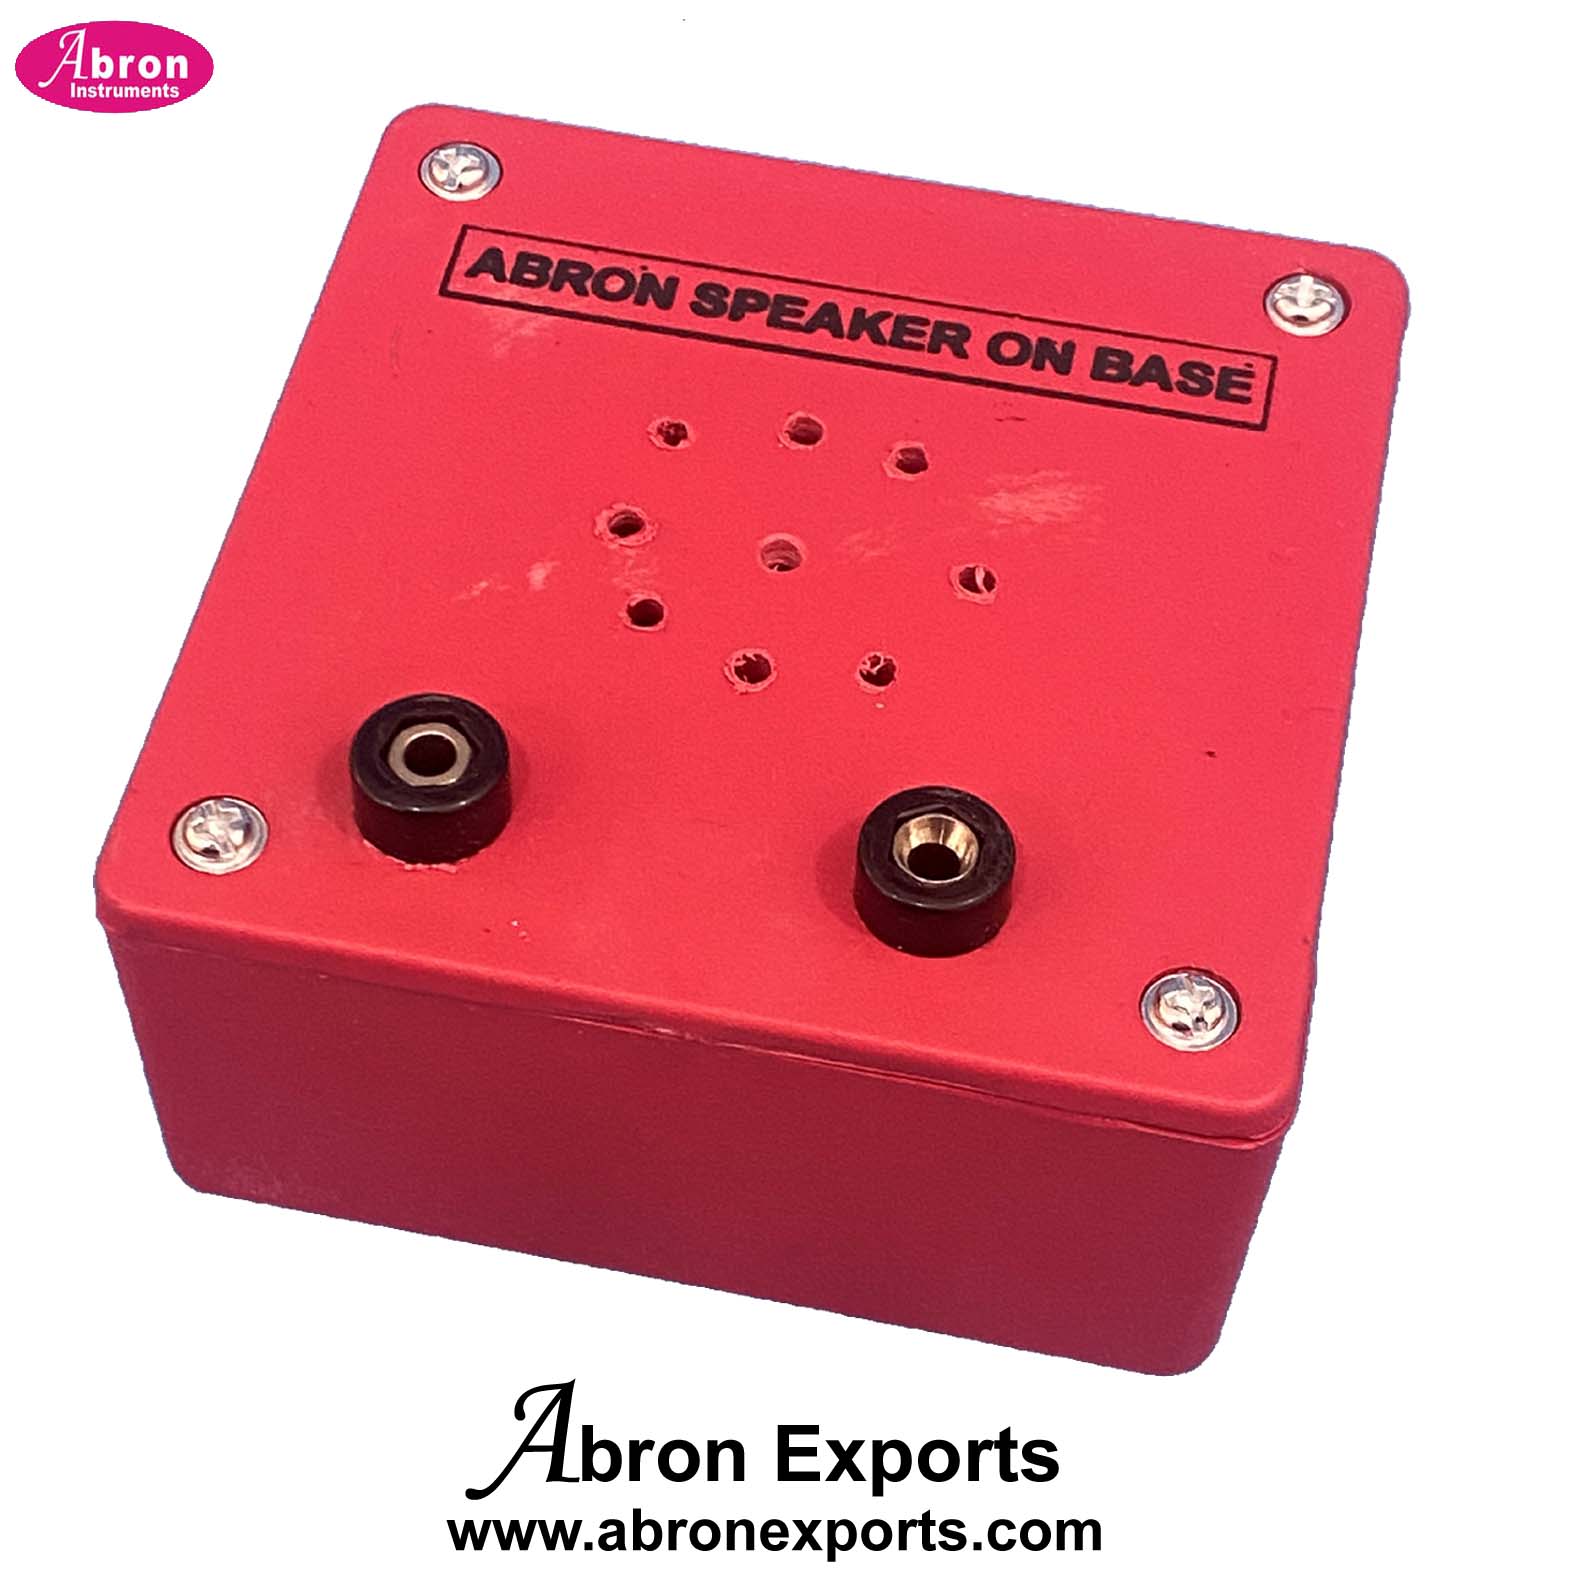 Electronic component spare speaker in box 10watts pack of 10 abron AE-1224SPB